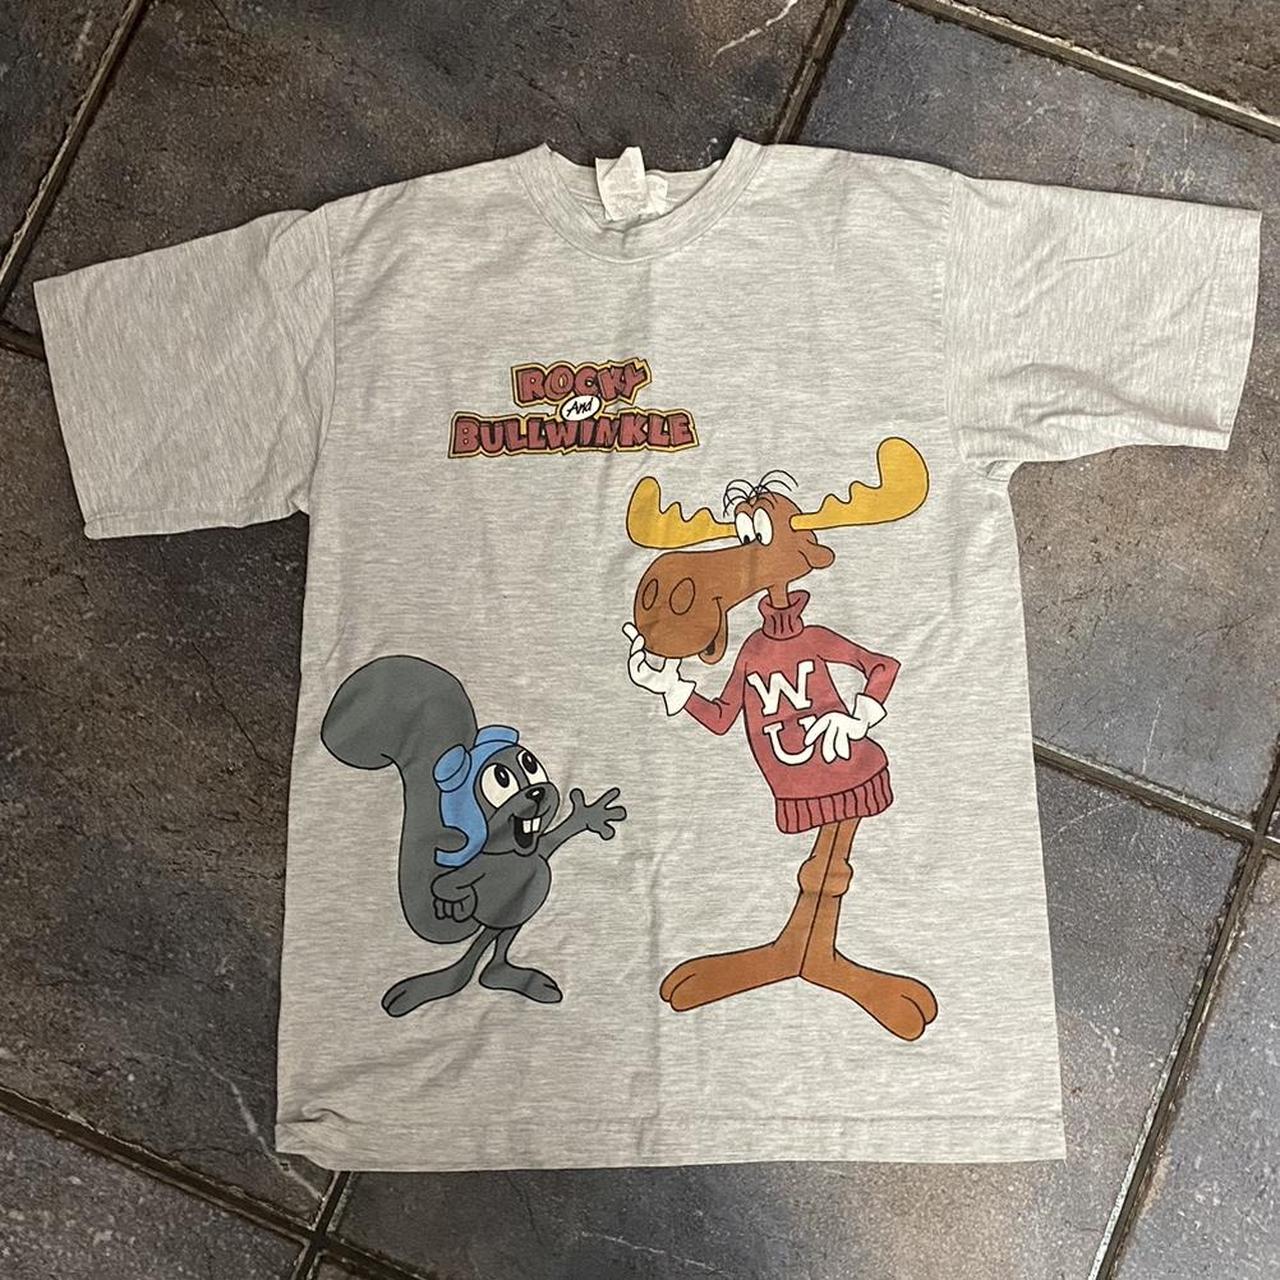 Vintage 1990s rocky and bullwinkle RARE t shirt...